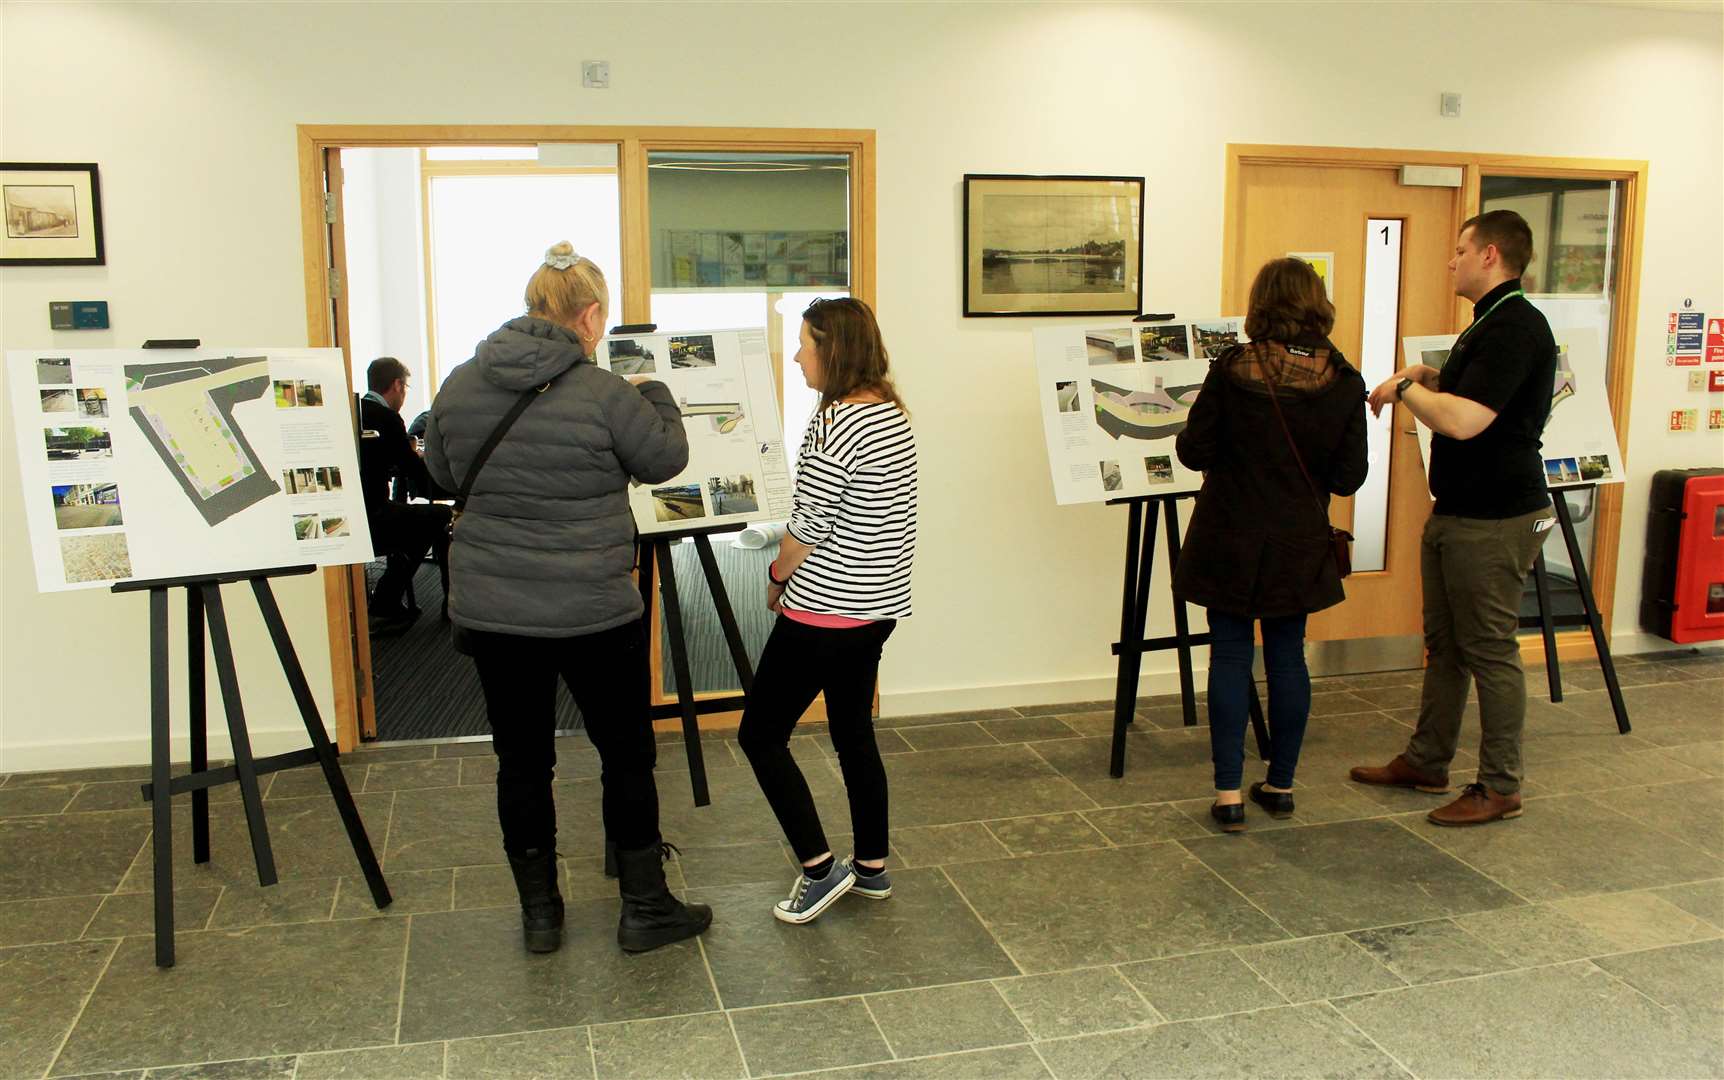 Carolyn Smith and Adam Manson from the Highland Council team discussing the town centre designs with members of the public on Friday.